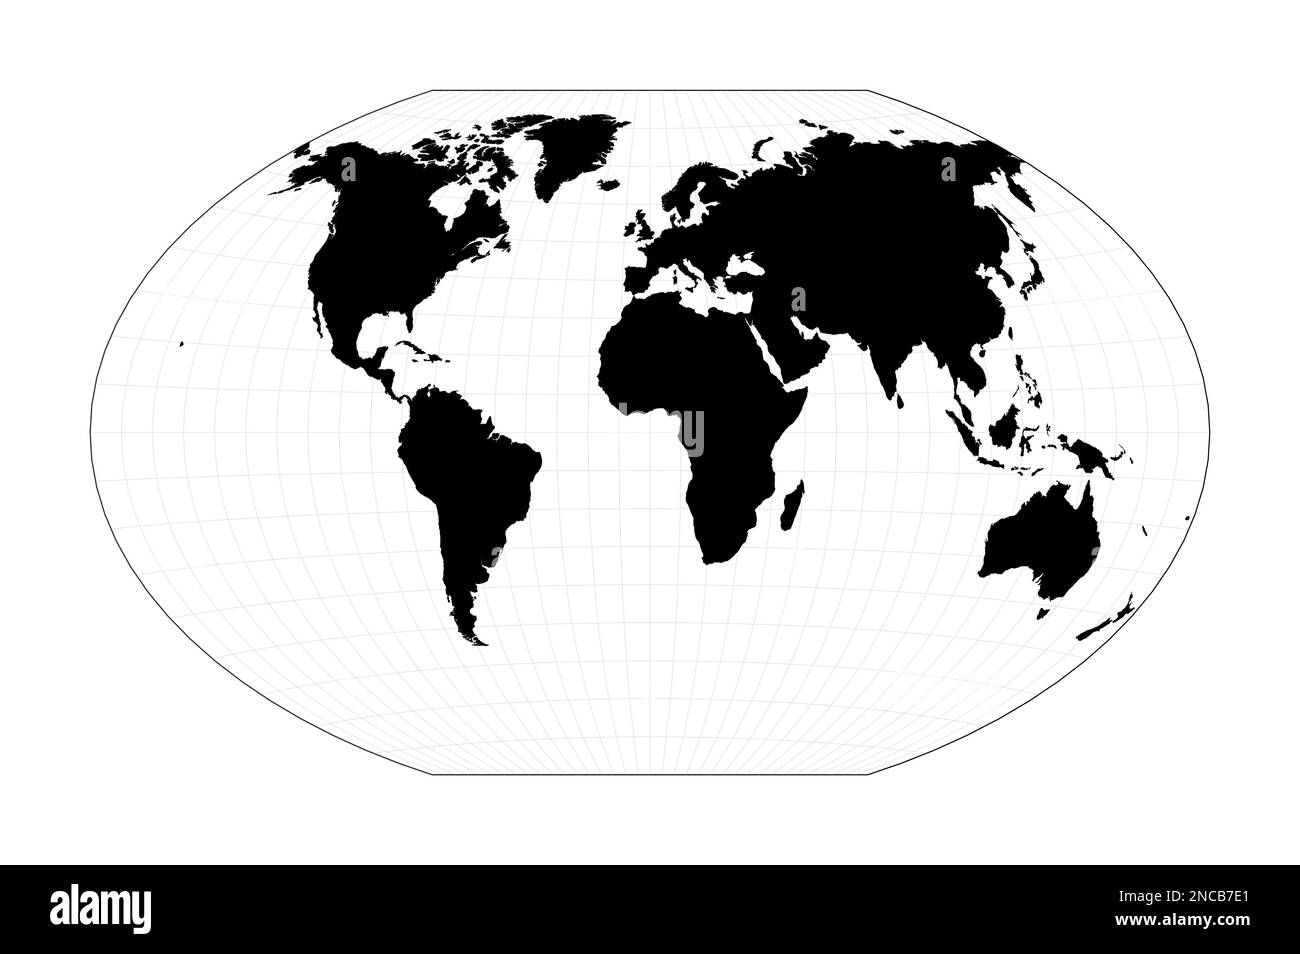 World shape. Winkel tripel projection. Plan world geographical map with graticlue lines. Vector illustration. Stock Vector